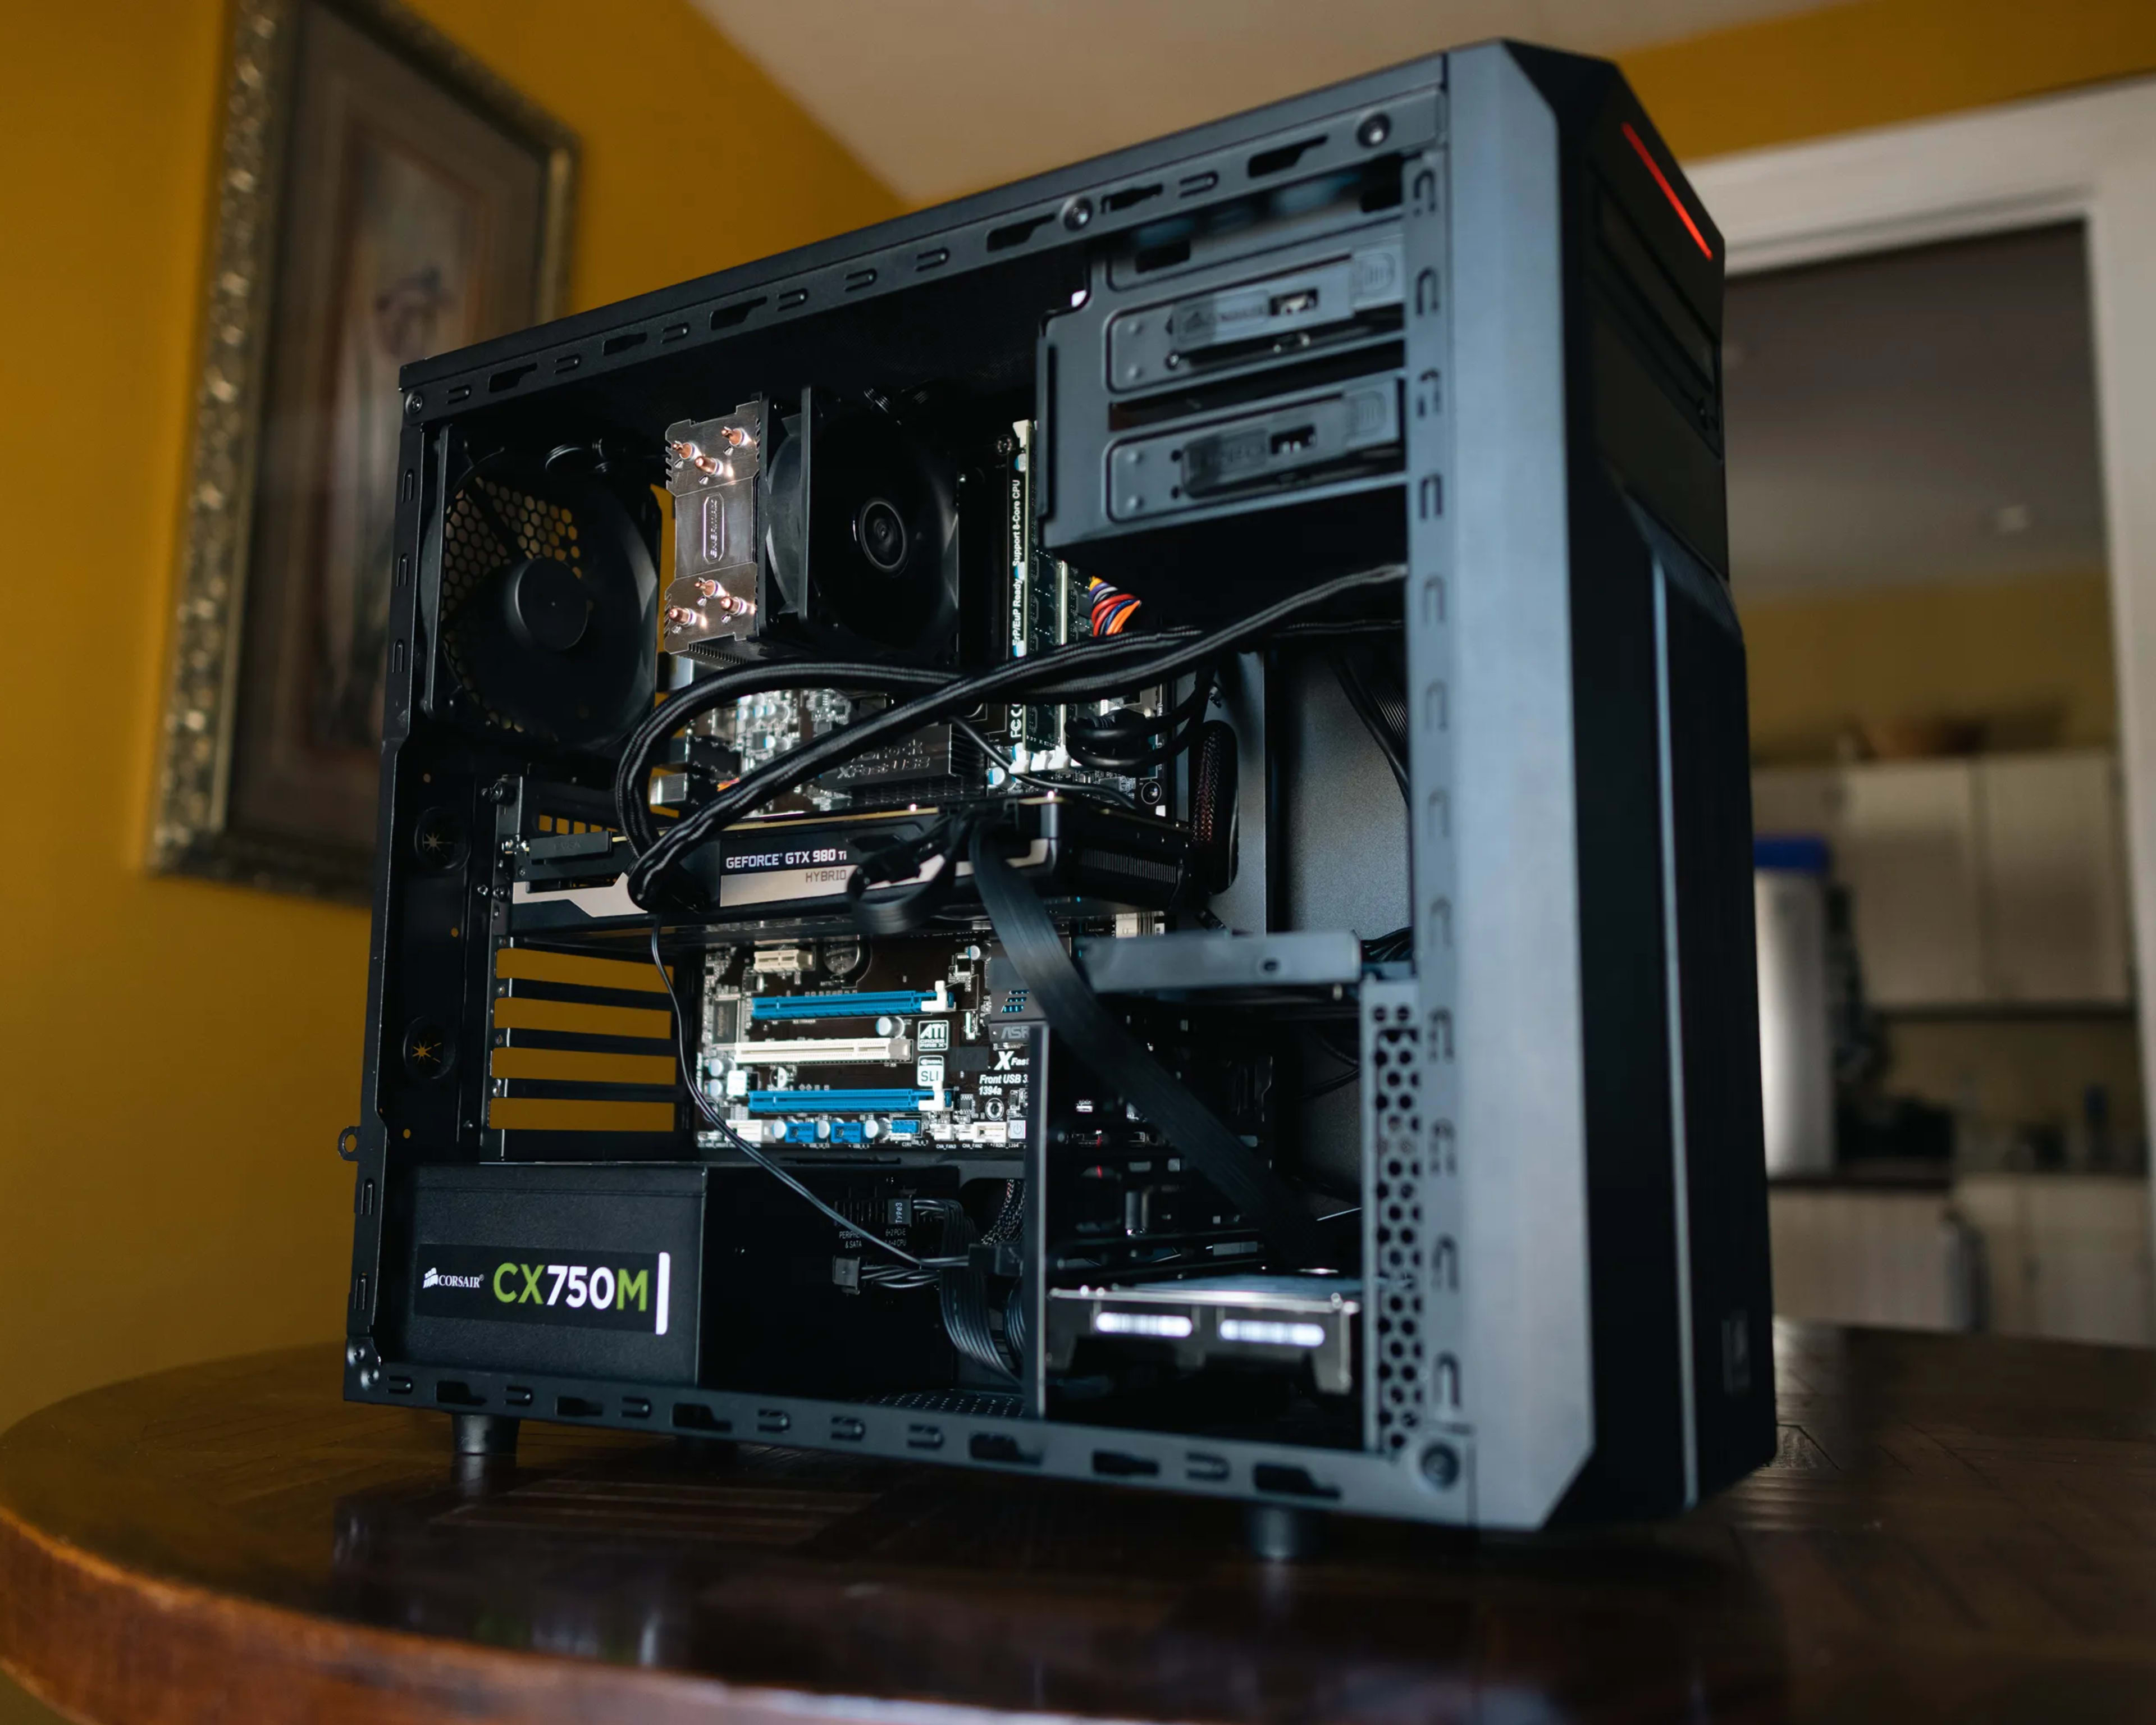 Budget Beast Gaming PC w/ Water Cooled GTX 980TI & 8-Core Processor